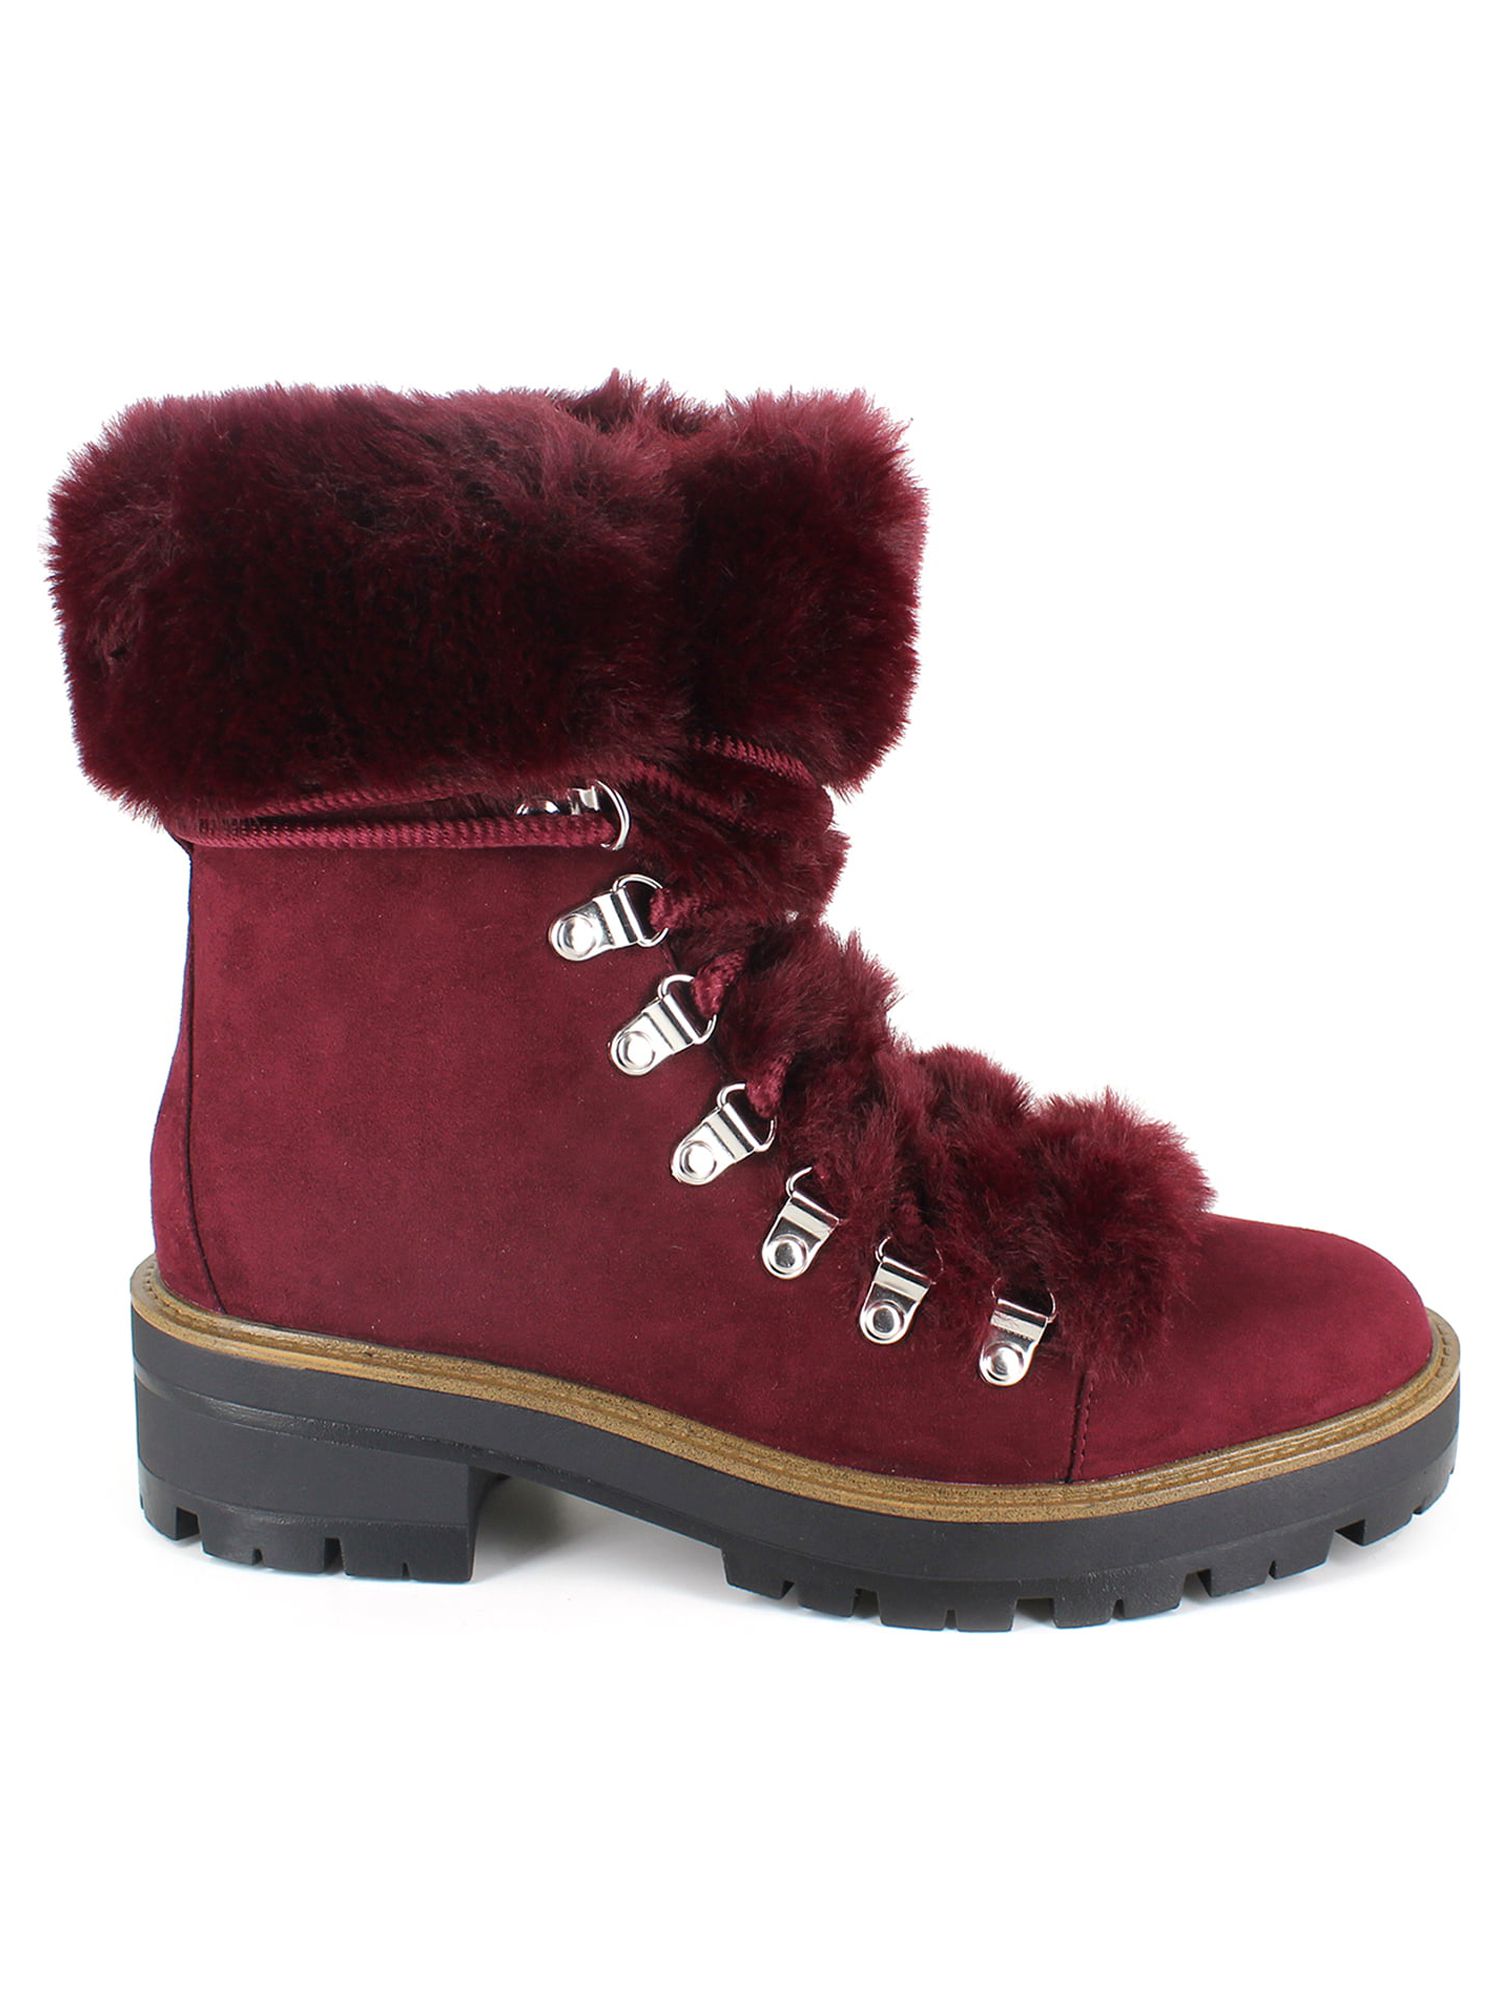 PORTLAND by Portland Boot Company Faux Fur Hiker Boot - image 2 of 5